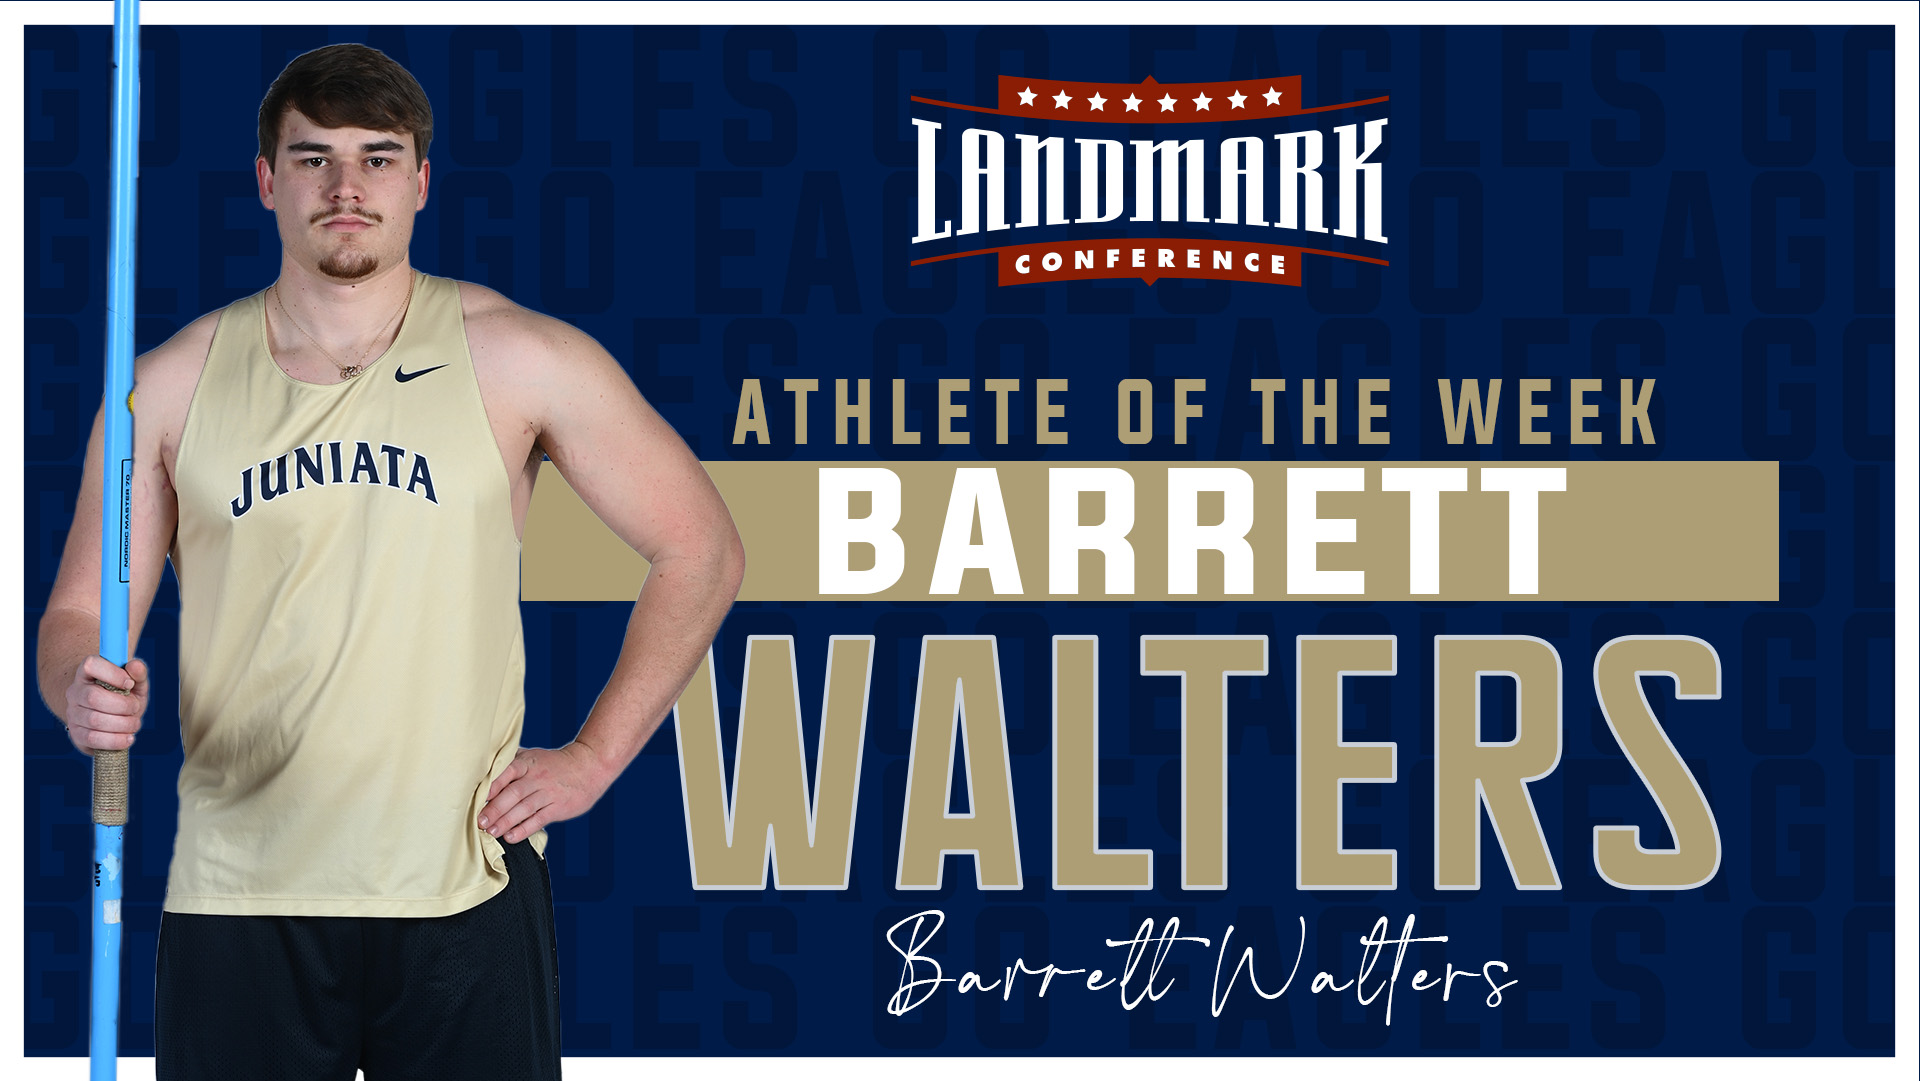 Walters Named Landmark Athlete of the Week for Field Events